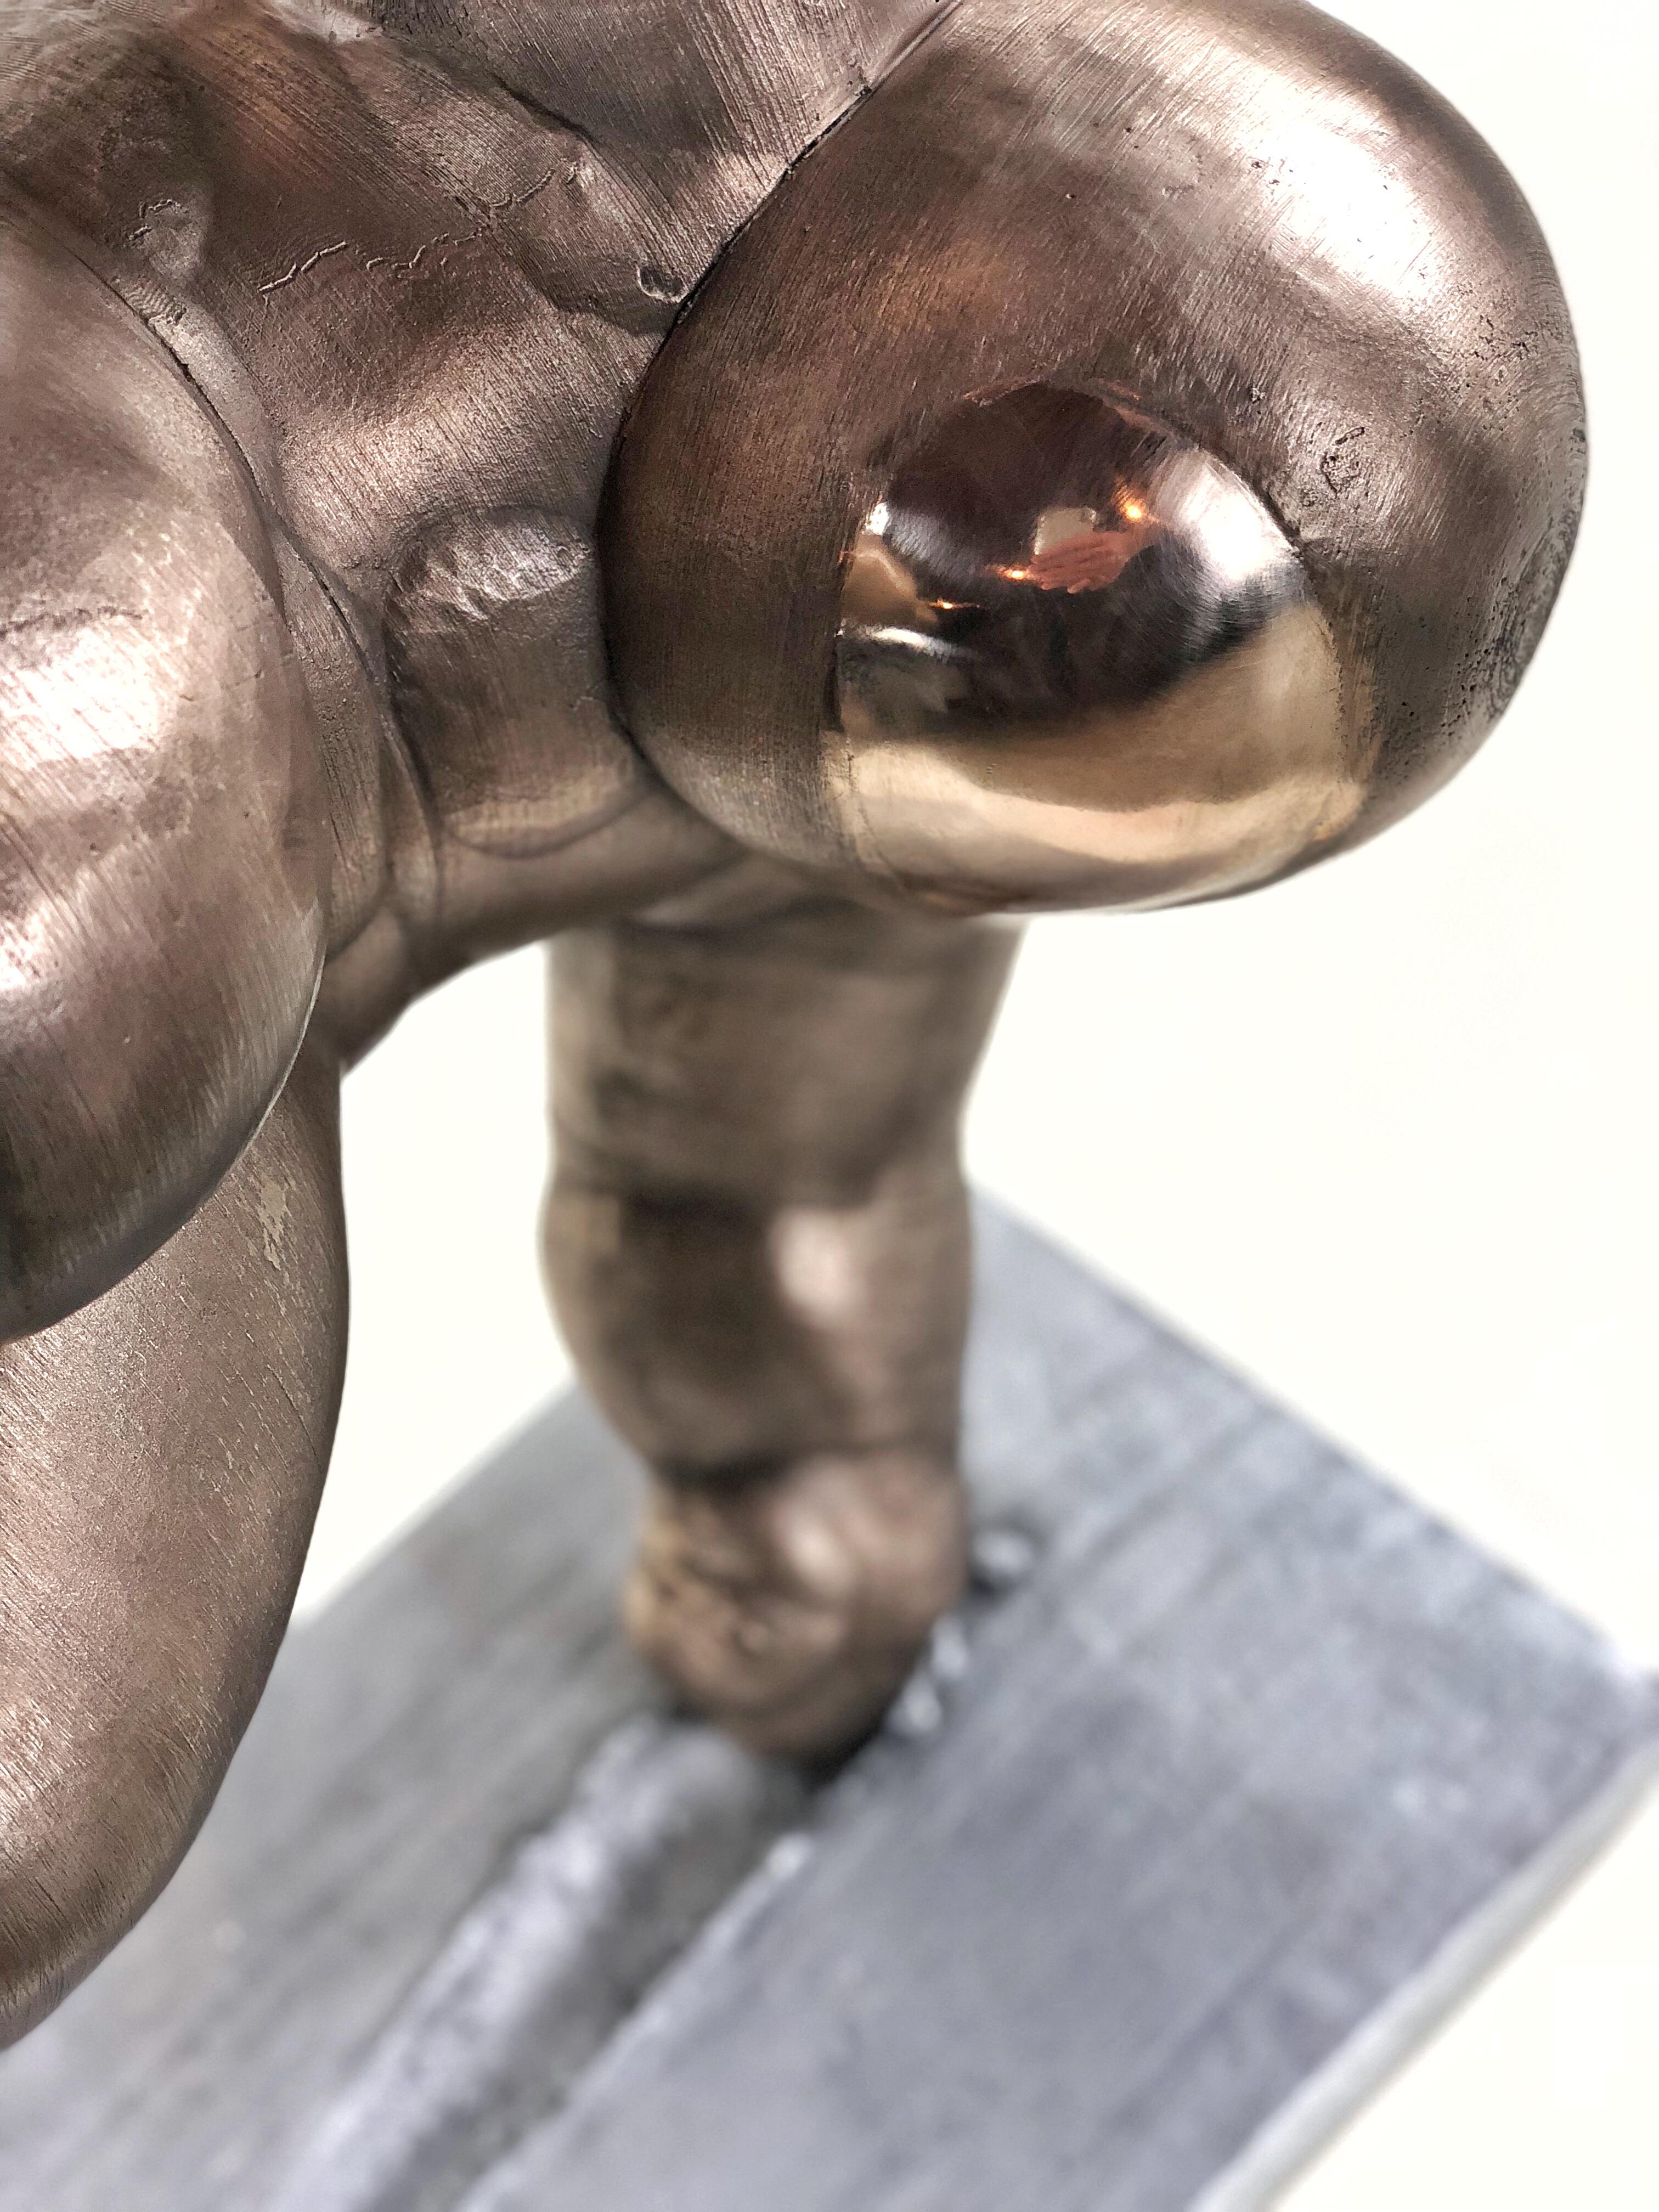 Bronze and aluminum - each edition has a unique mounting. Weight approx 50 lbs

Emil Alzamora was born in Lima, Peru 1975, and raised in Boca Grande, Florida. He later attended Florida State University where he graduated Magna cum Laude in 1998